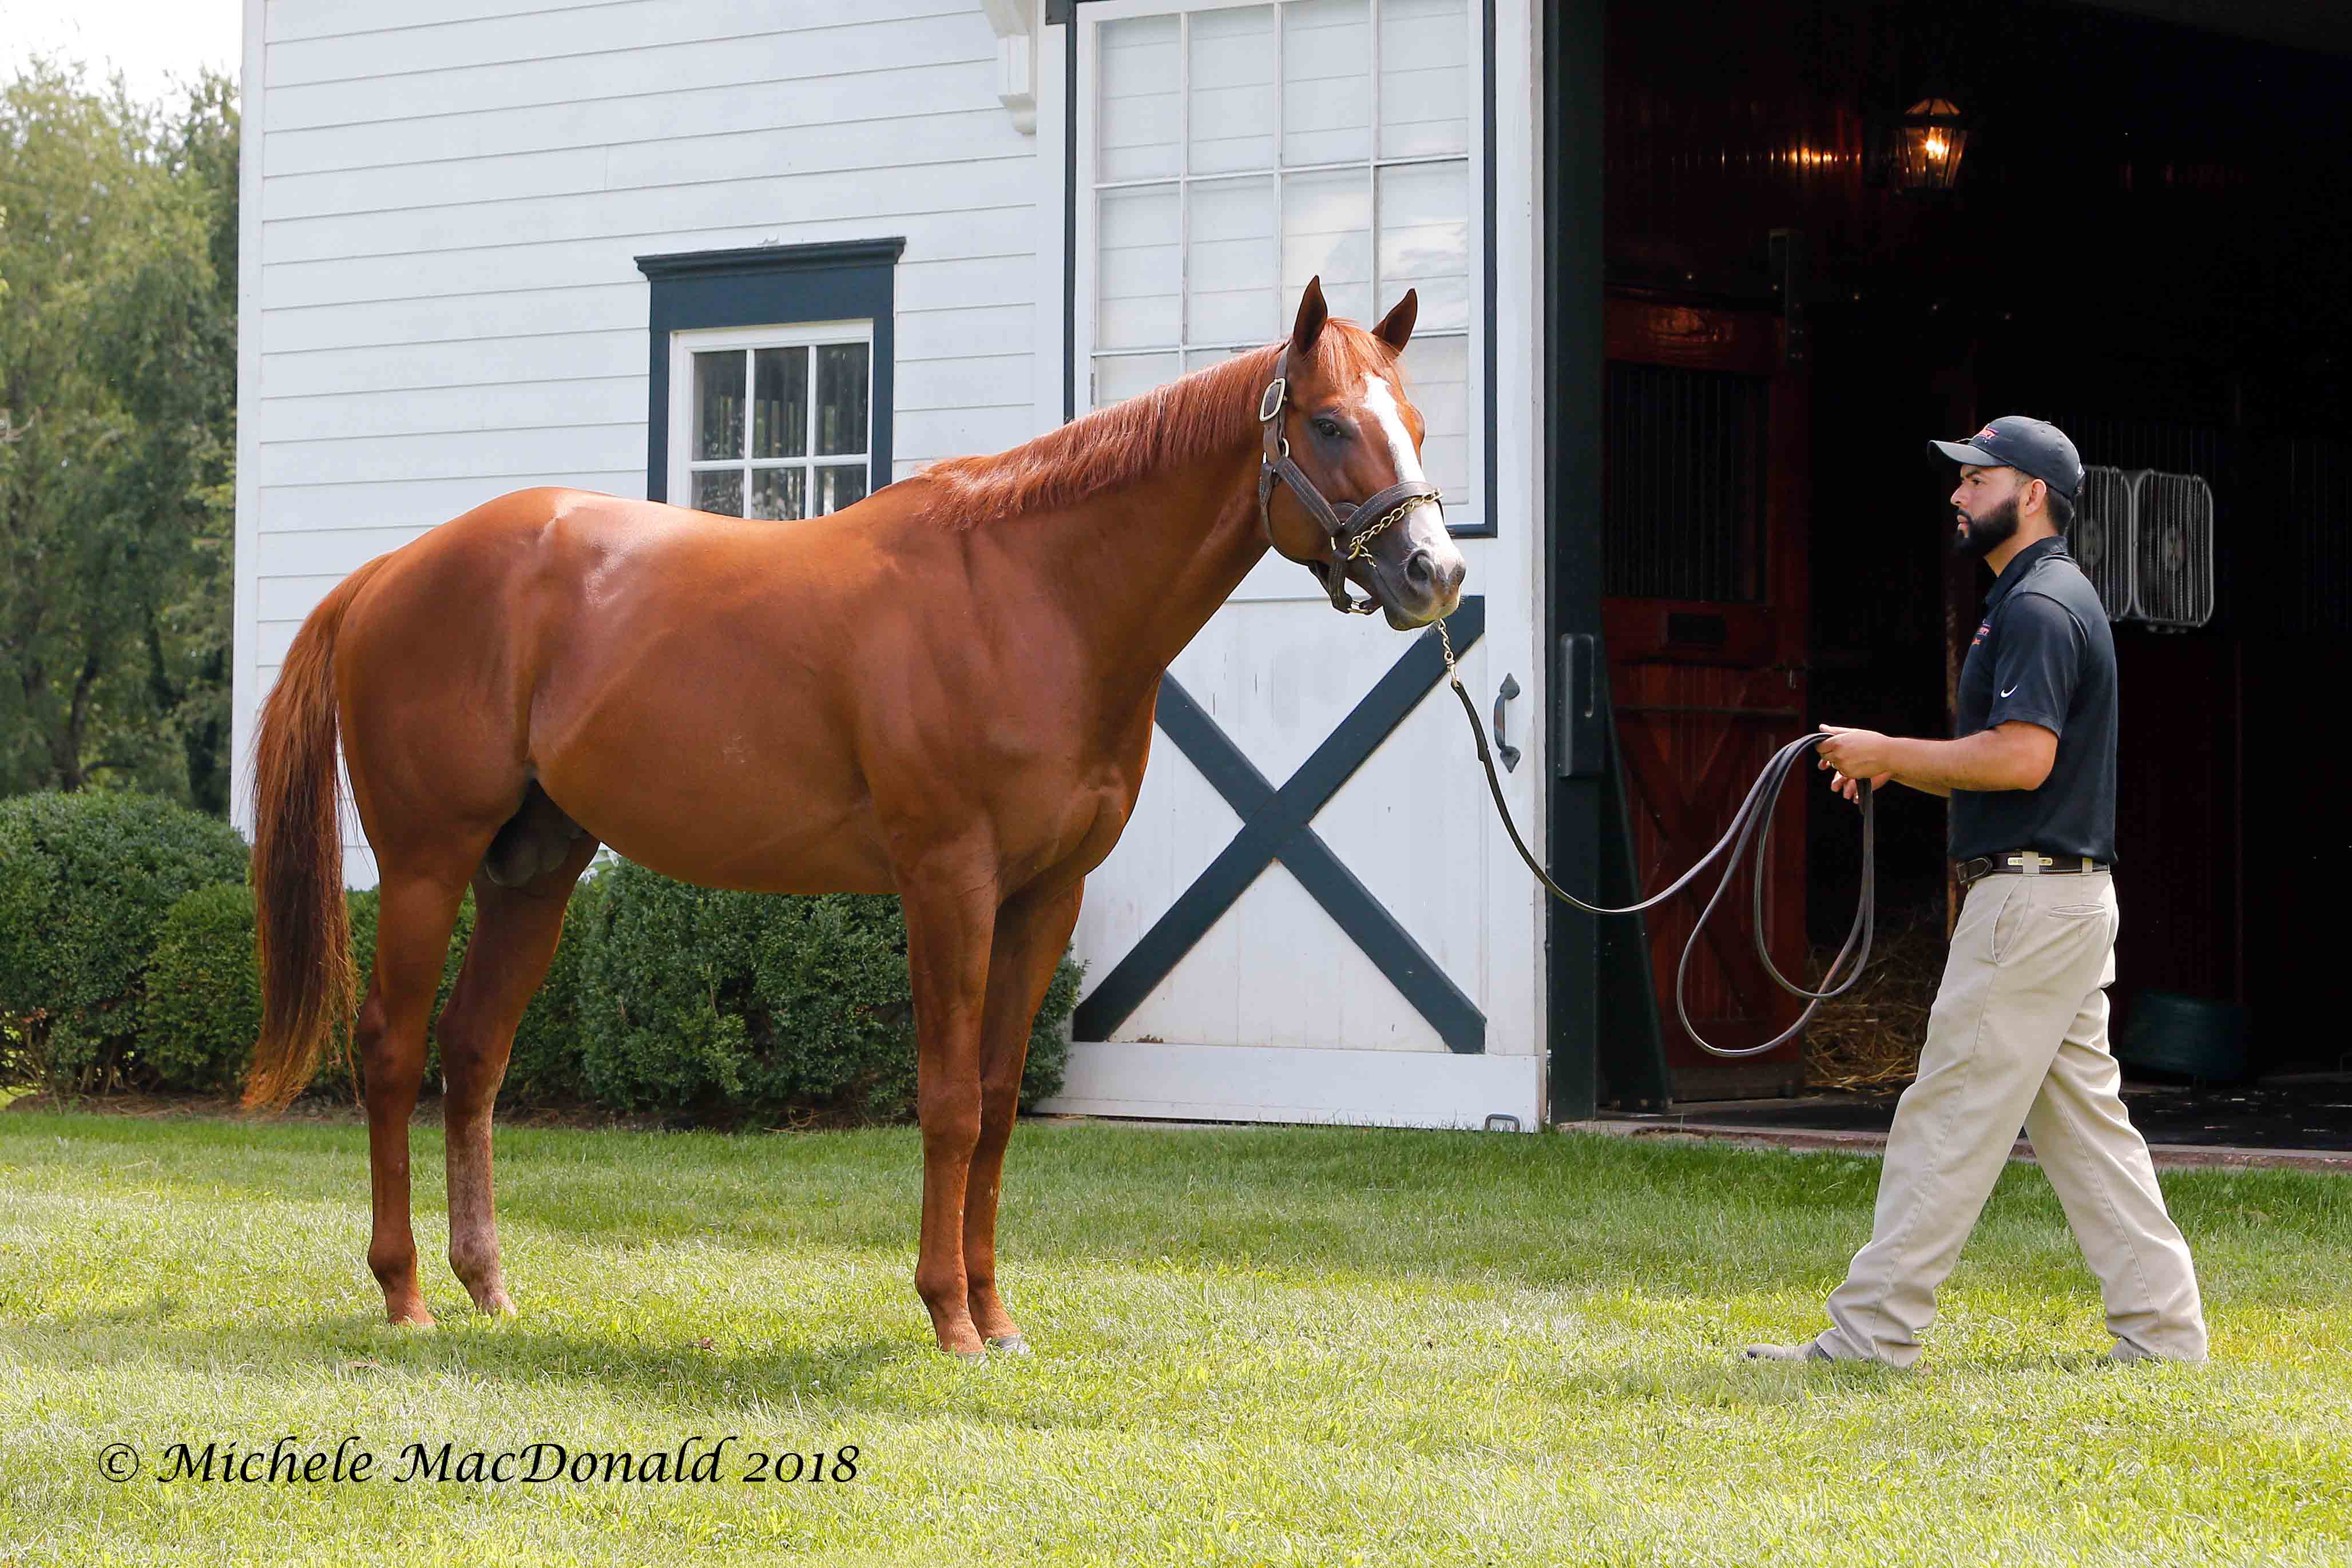 Exciting prospect: “He’s got the looks, he’s got the pedigree, and he more than demonstrated the ability,” says Spendthrift general manager Ned Toffey. “What else could you ask for?” Photo: Michele MacDonald